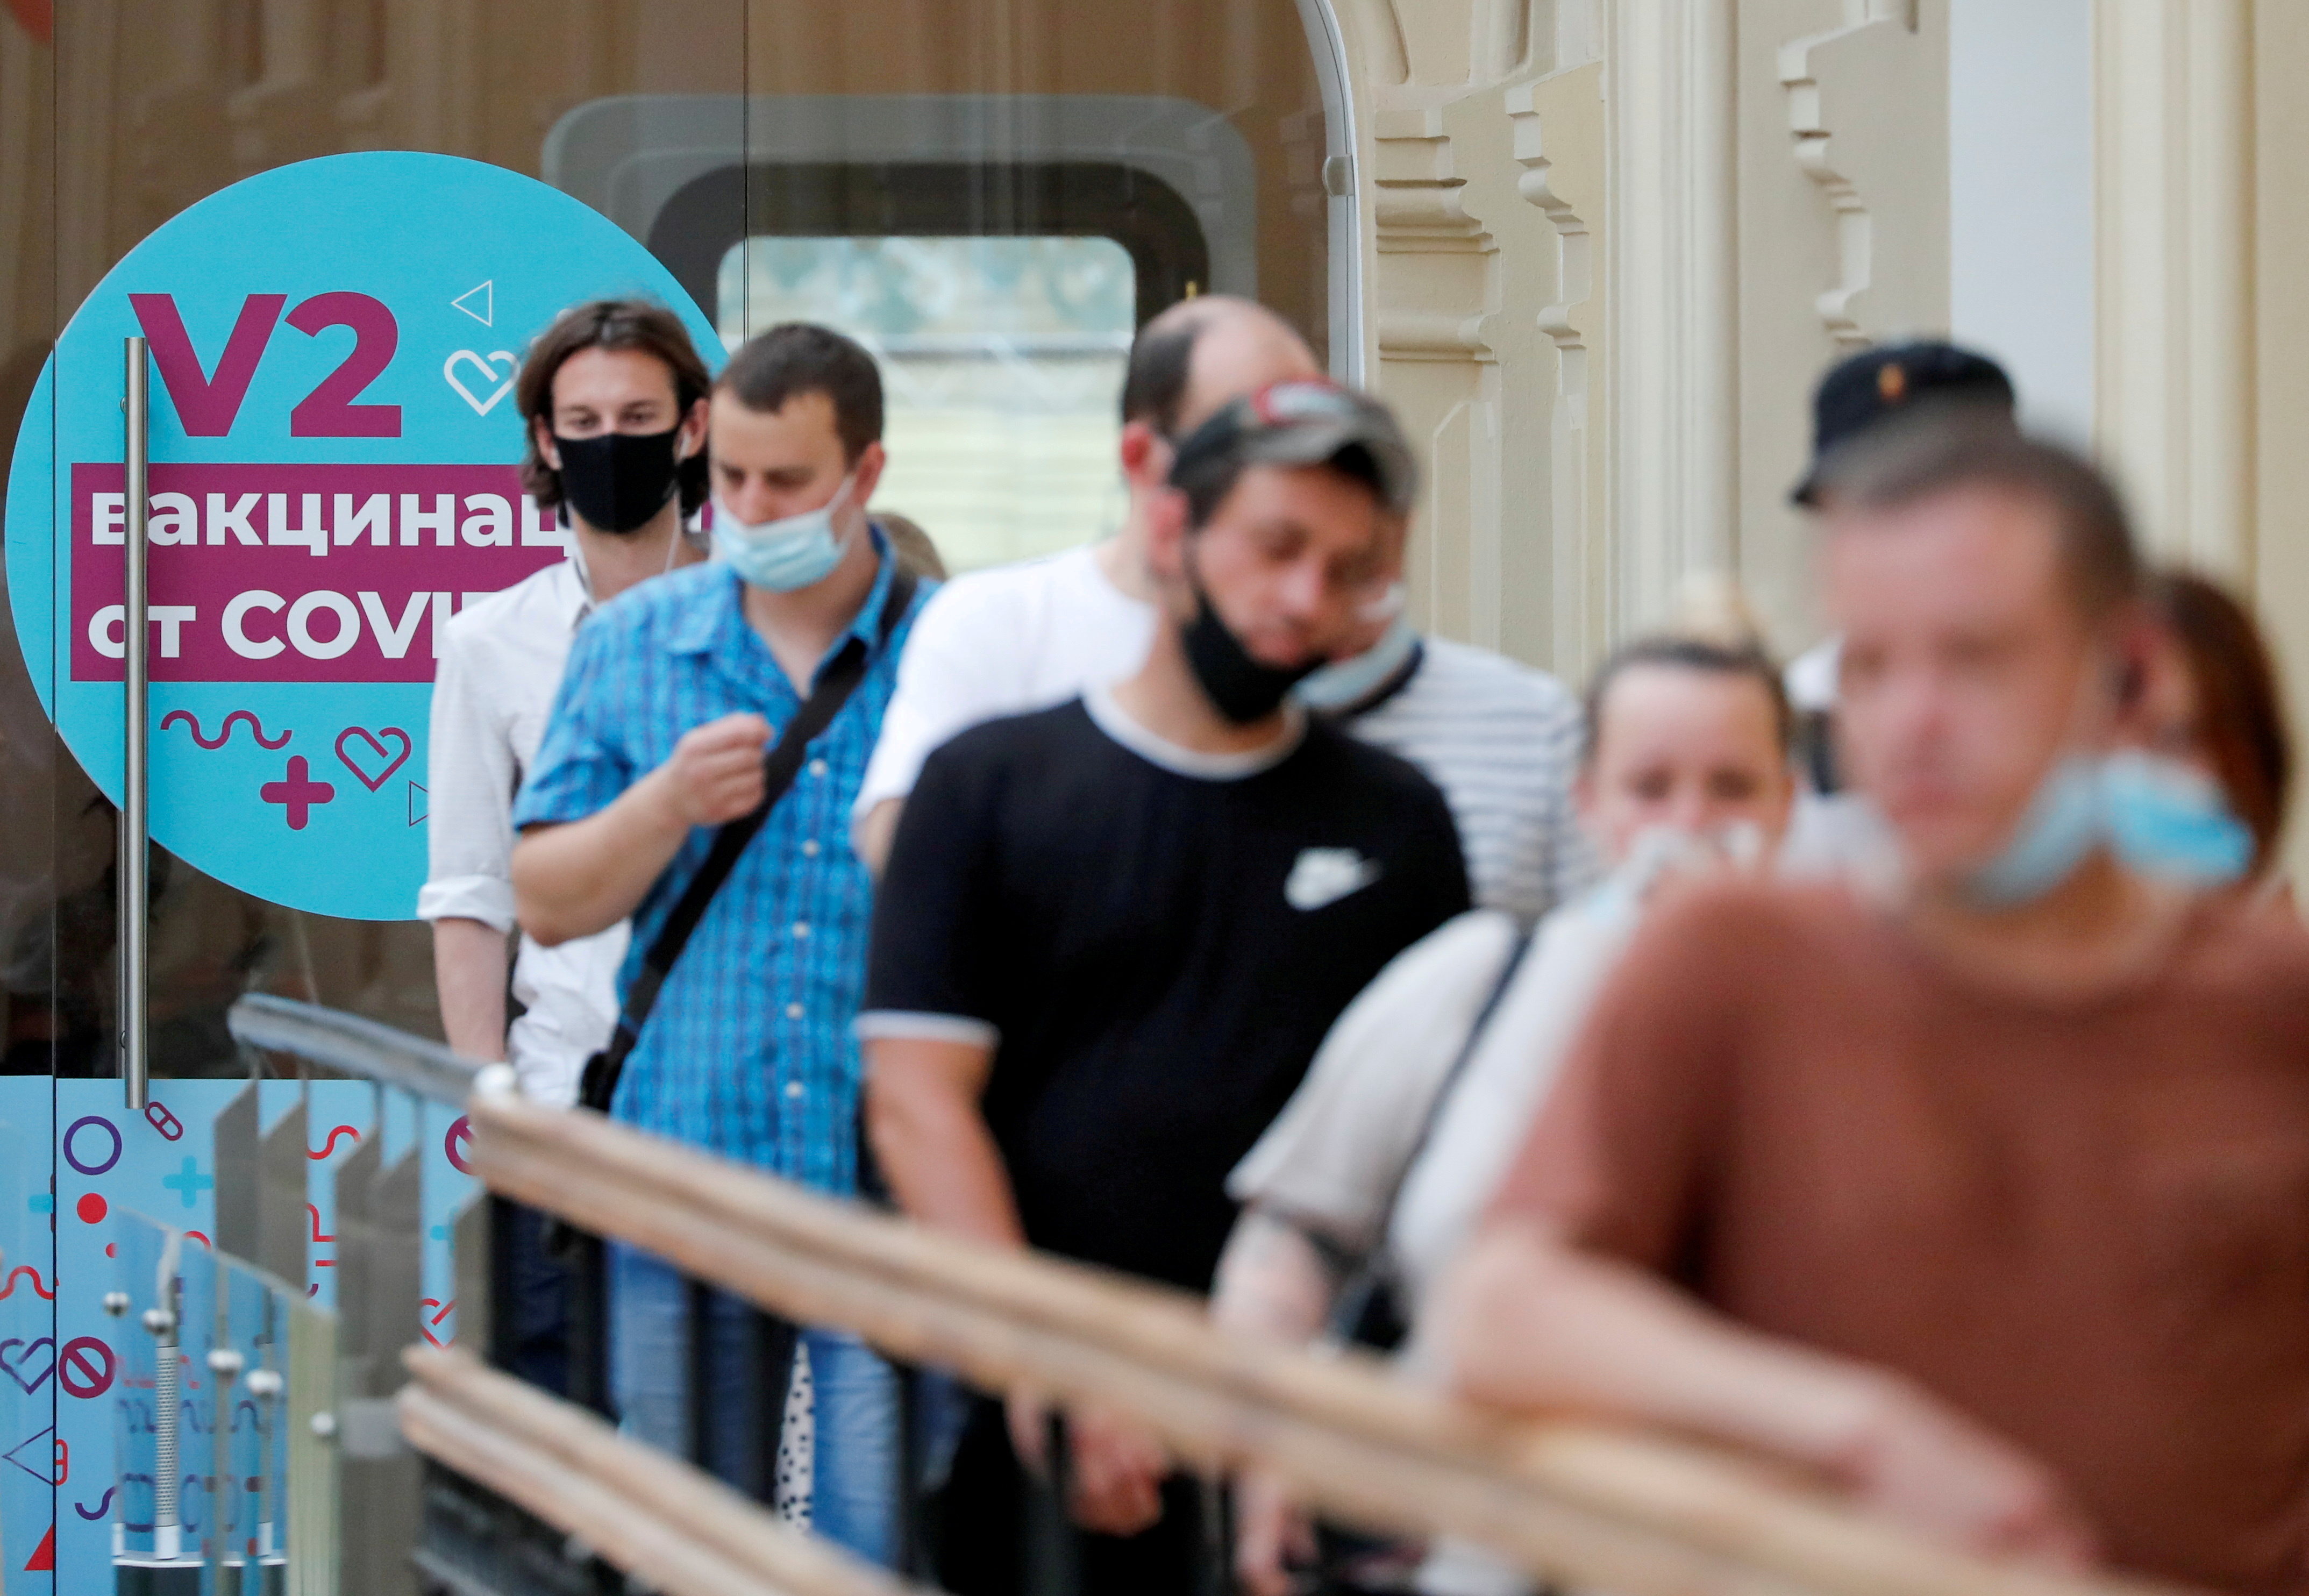 People line up to receive vaccine against the coronavirus disease (COVID-19) outside a vaccination centre in the State Department Store, GUM, in central Moscow, Russia June 25, 2021. REUTERS/Shamil Zhumatov